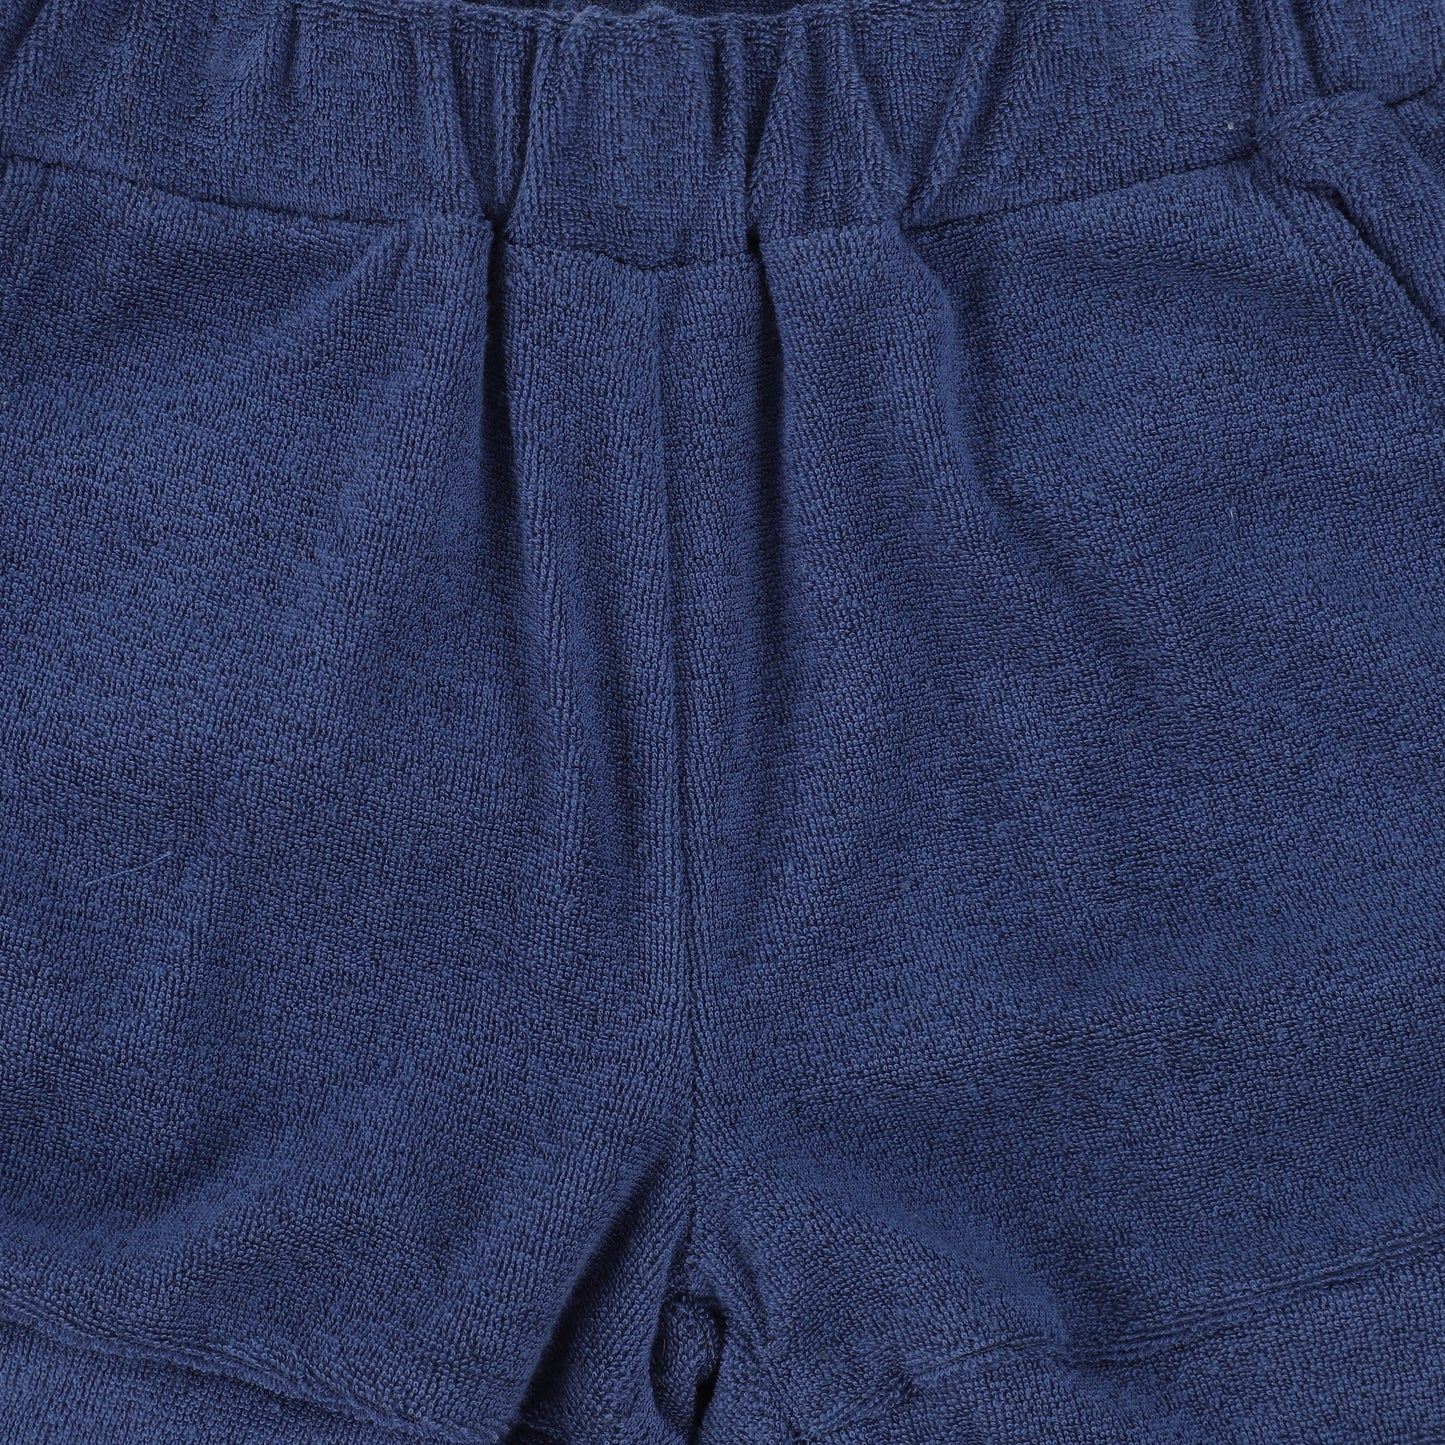 BAMBOO BLUE TERRY SHORTS